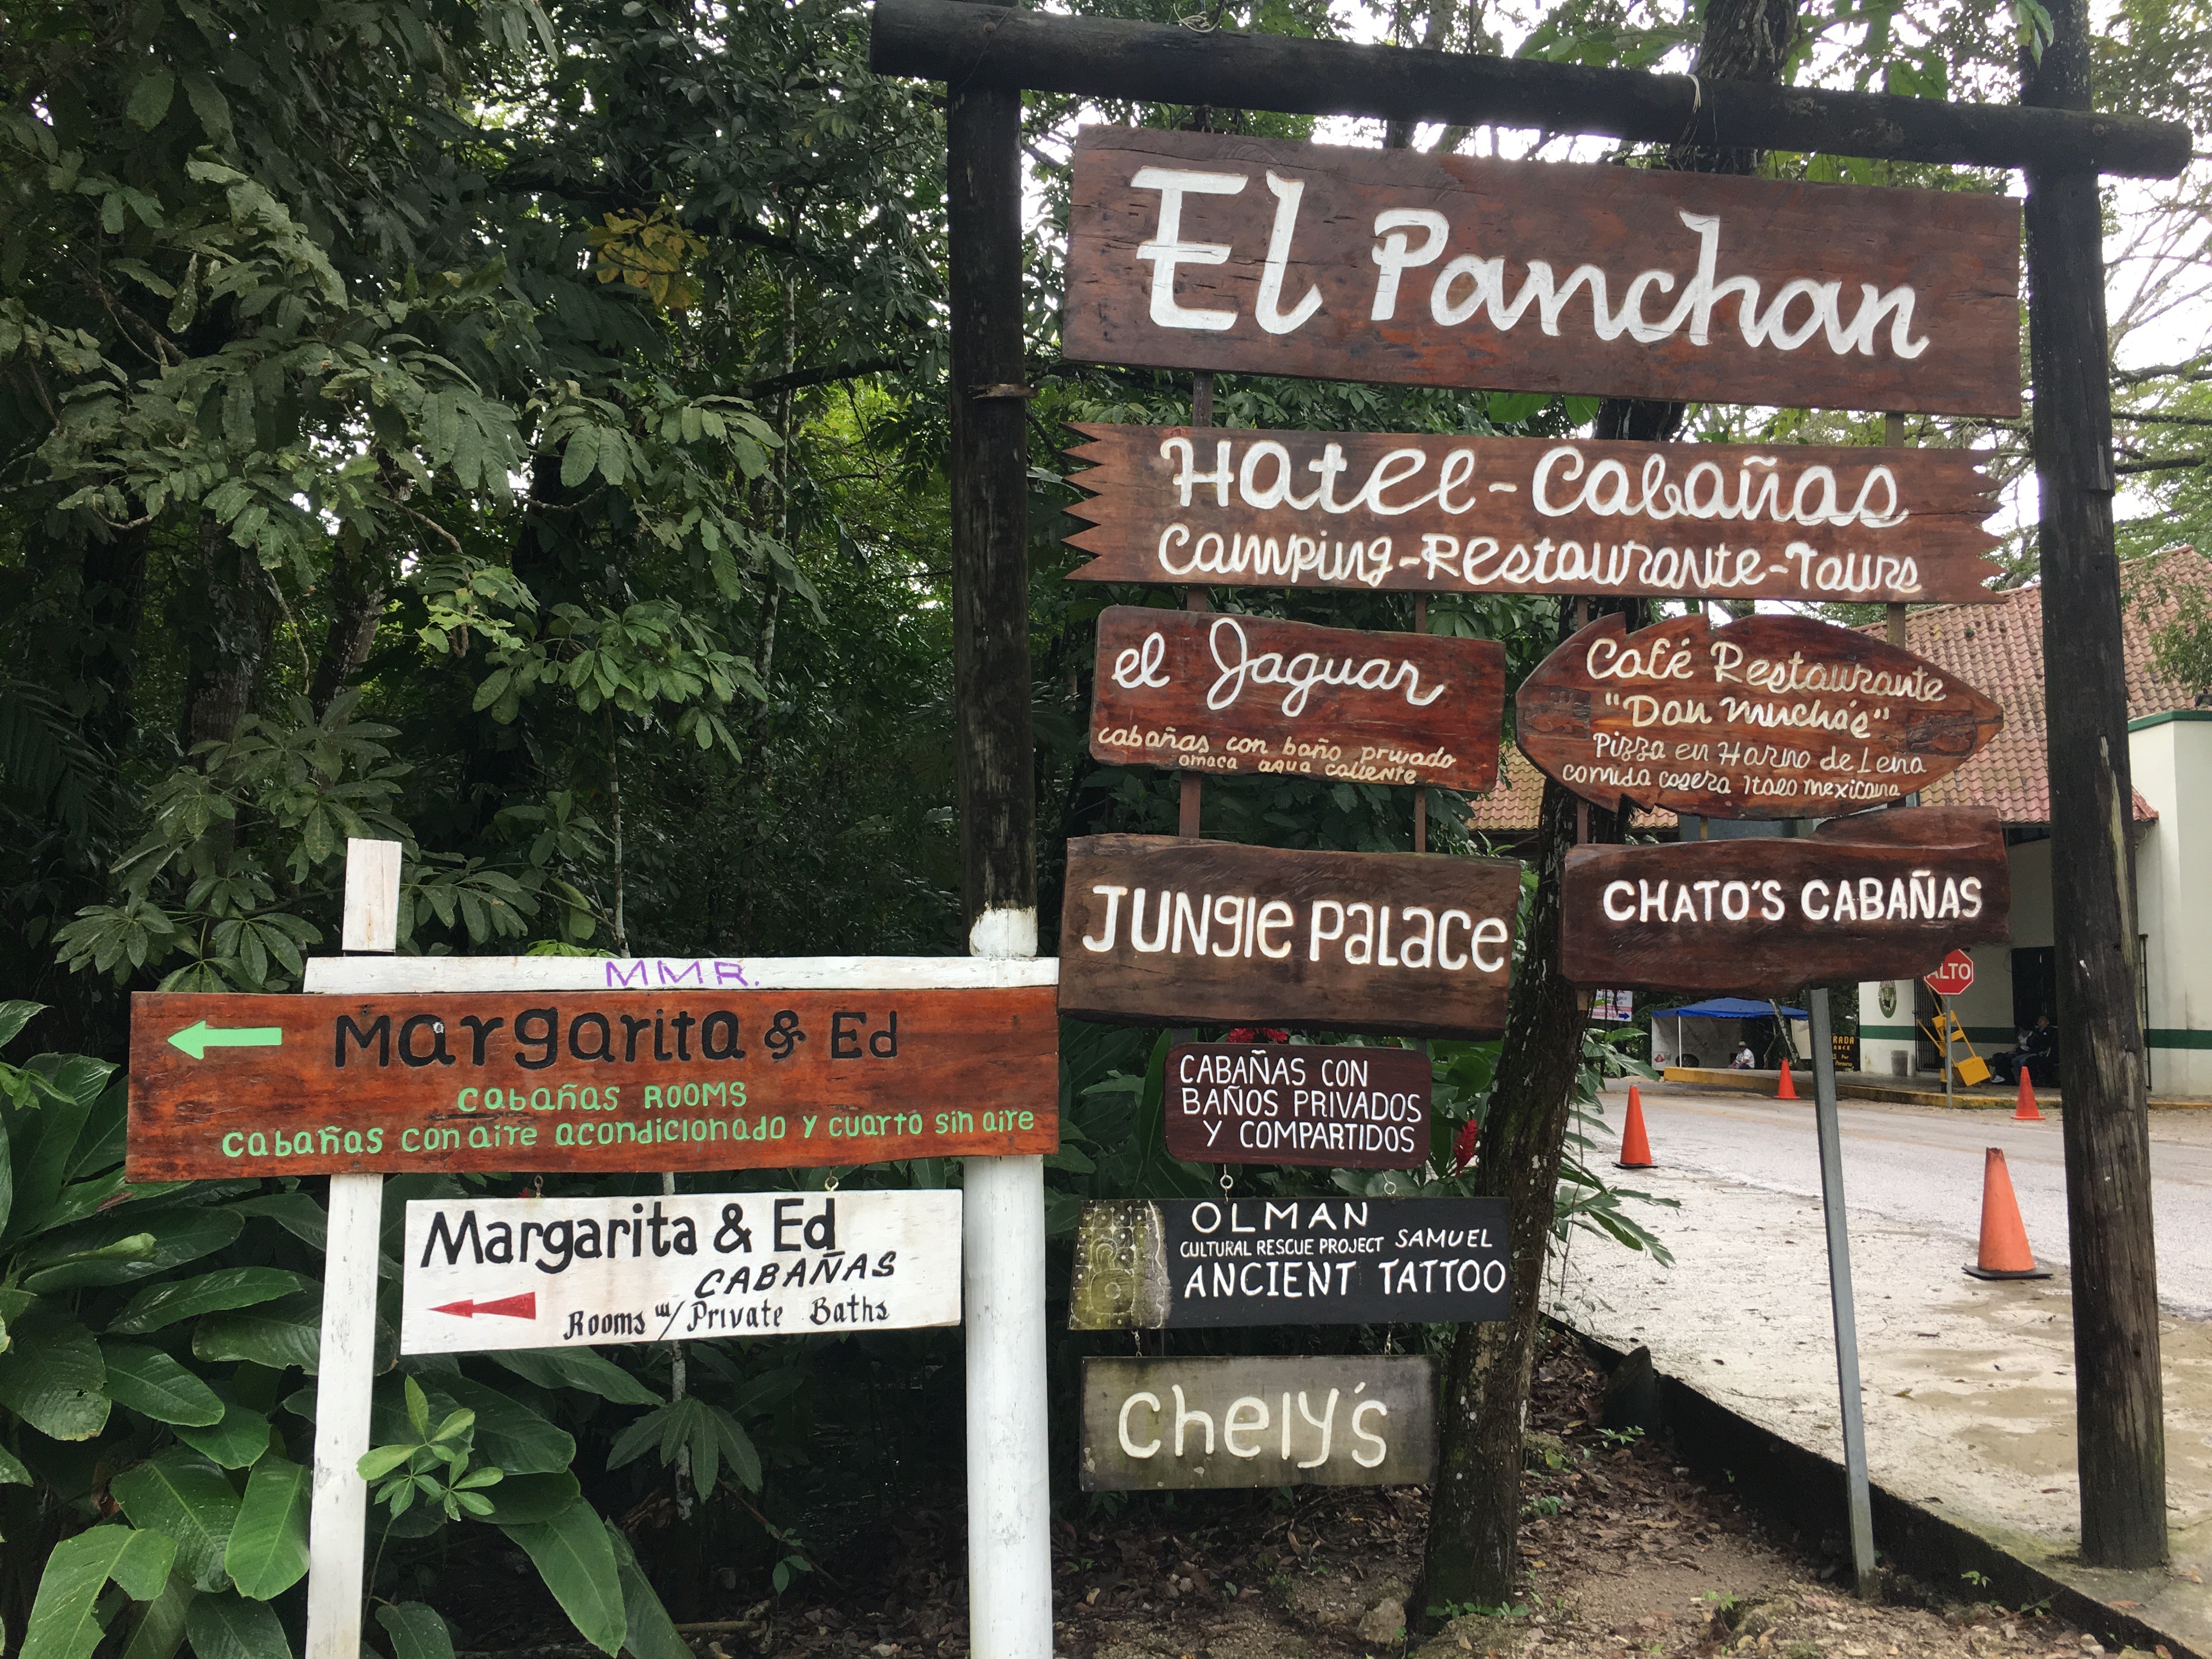 El Panchan sign from the road